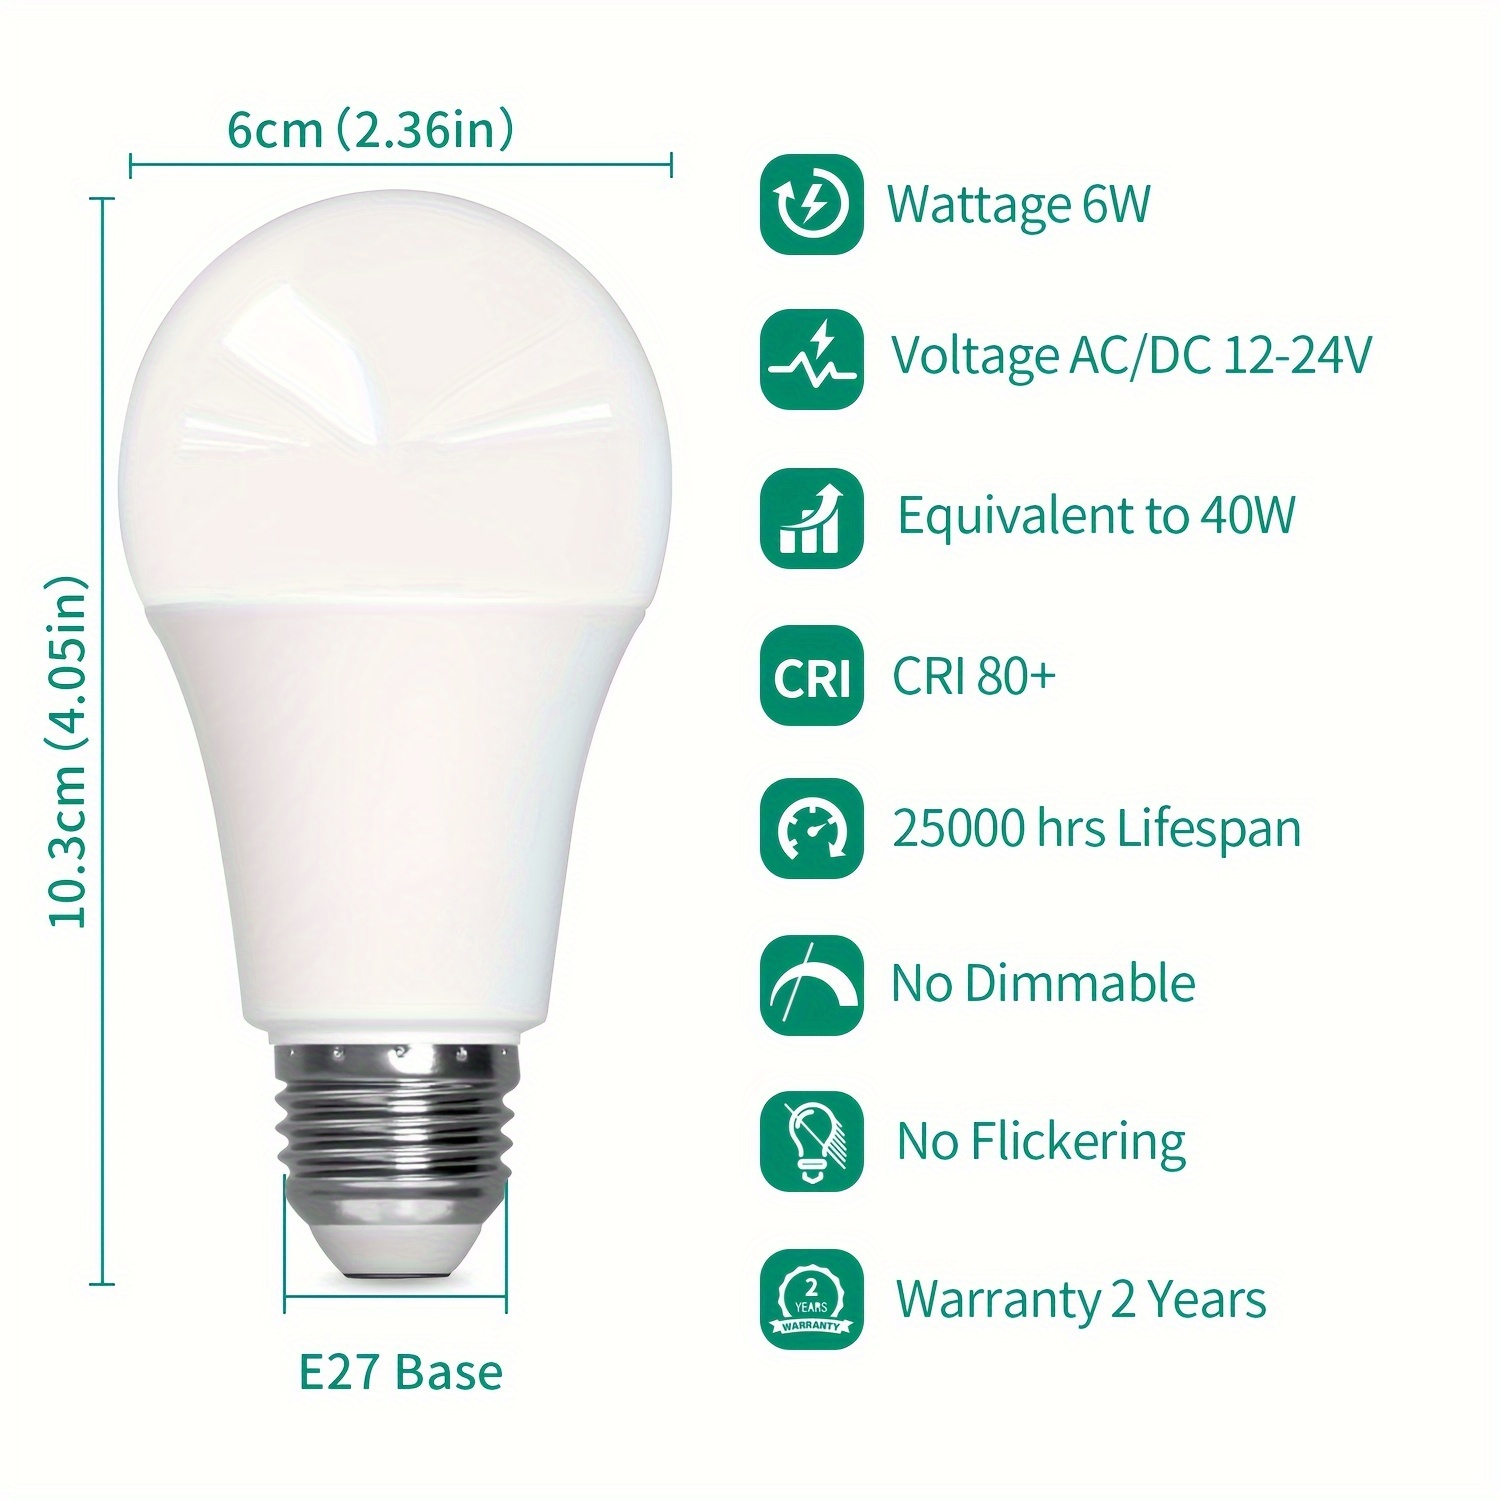 Lampe LED dimmable (A60,9W,E27,6500K)